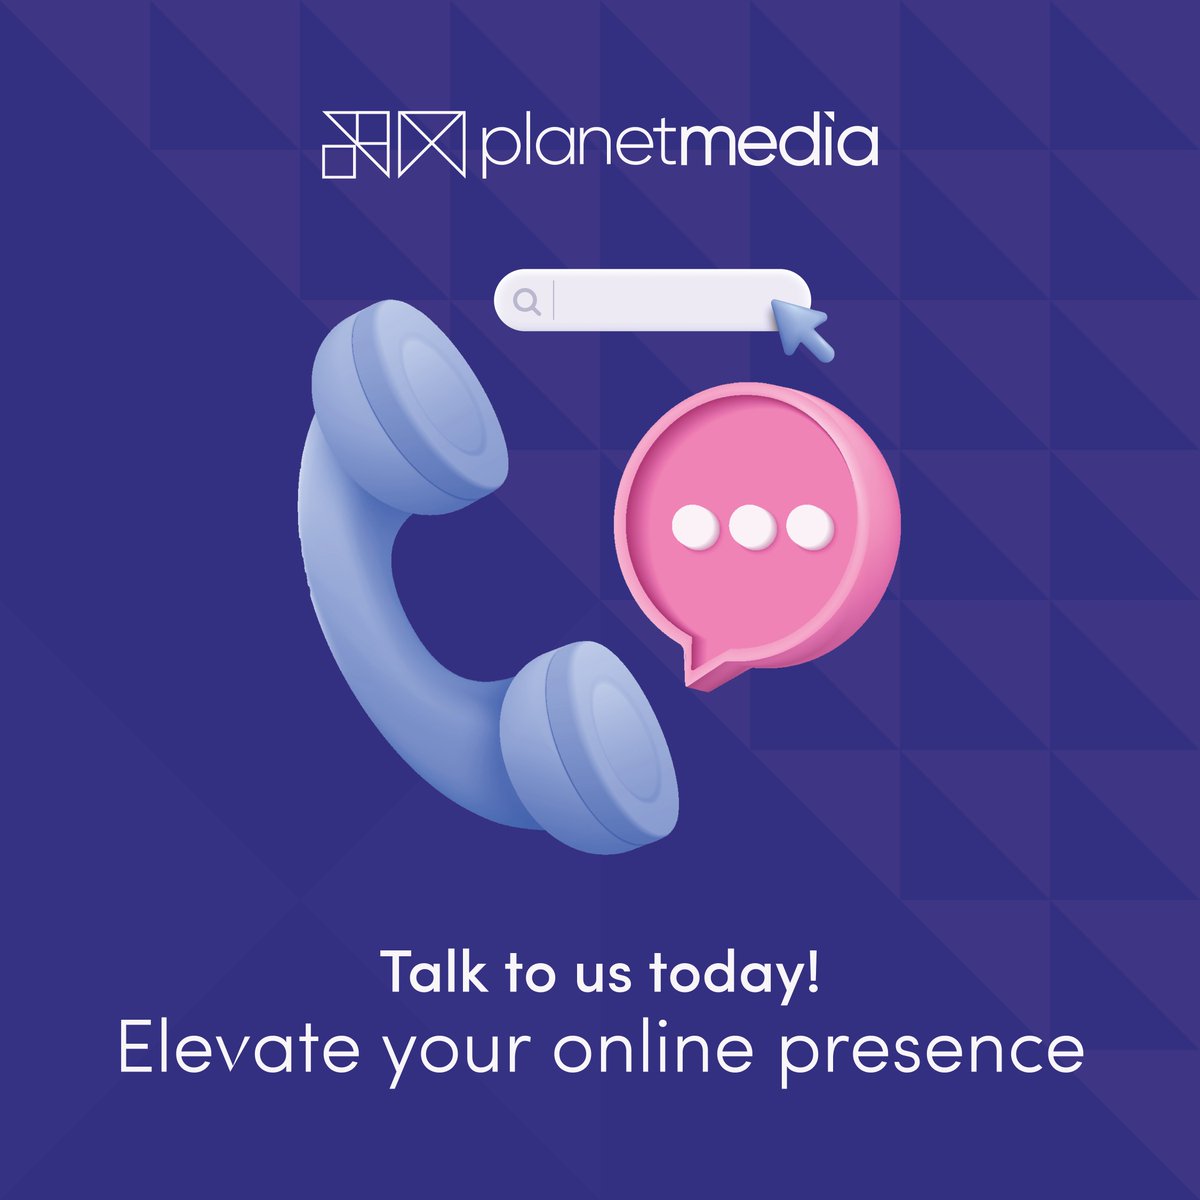 Ready to elevate your online presence? At Planetmedia, we have built over 100 websites across every industry you can think of. Talk to us today and turn your web dreams into reality! 💻 🚀 #planetmedia #marketing #advertsing #technology #creative #services #digitalmarketing